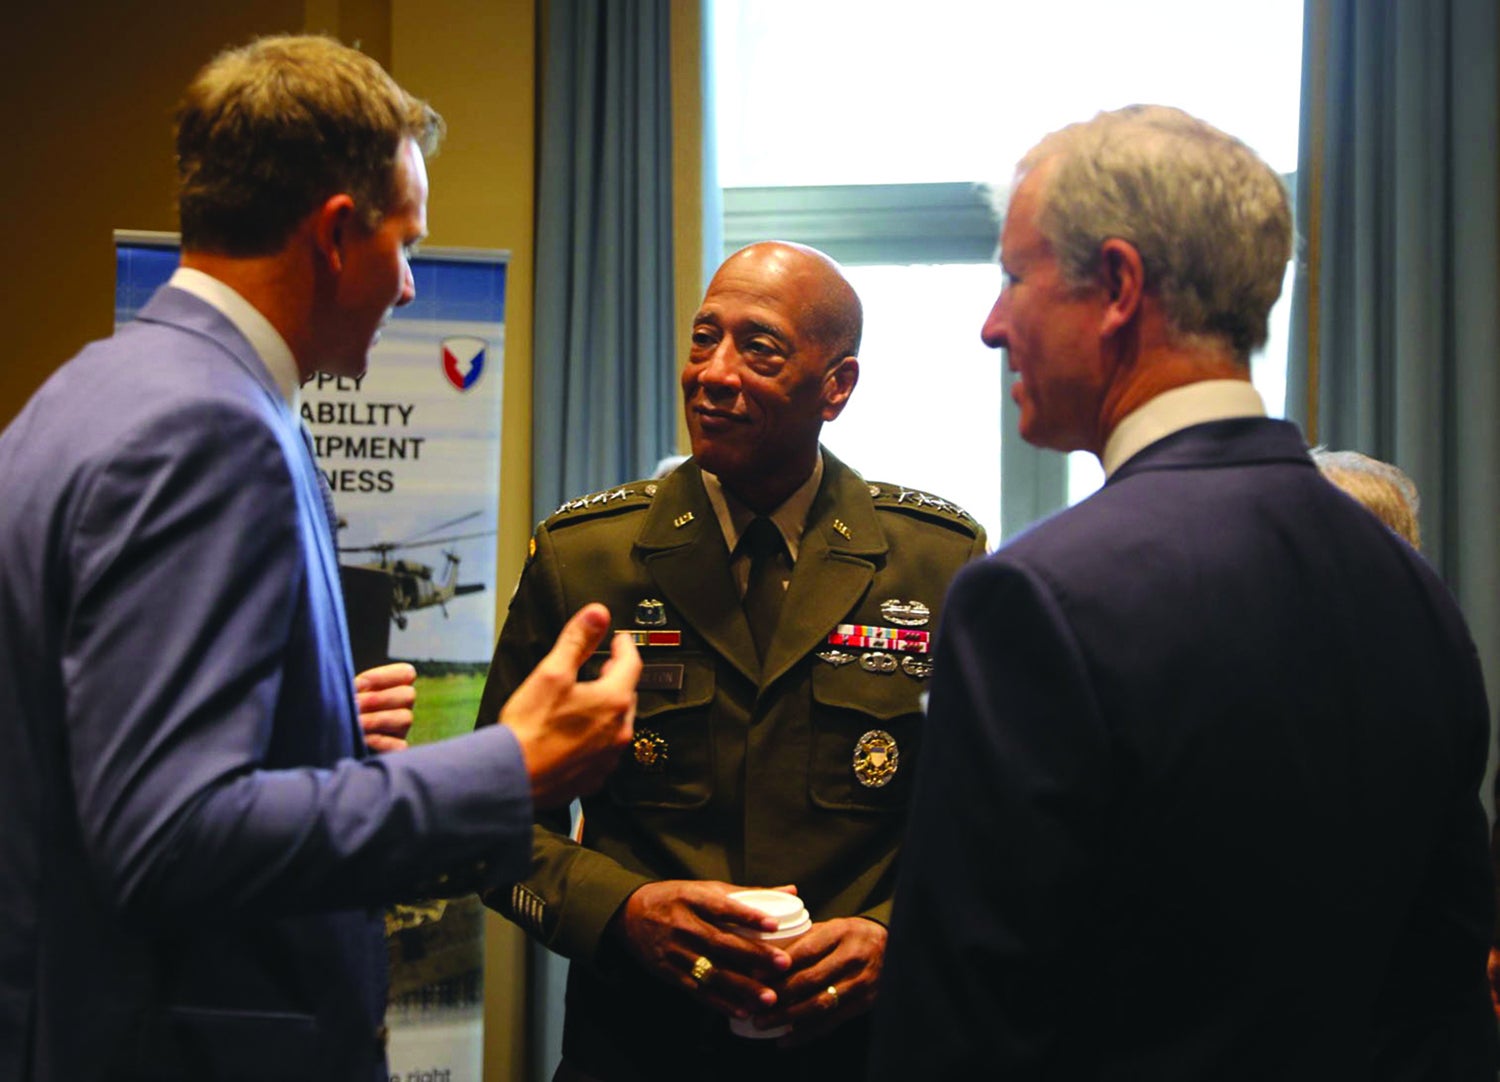 Gen. Charles Hamilton, center, commanding general of the U.S. Army Materiel Command, meets with lawmakers on Capitol Hill. (Credit: U.S. Army/Lindsay Grant)